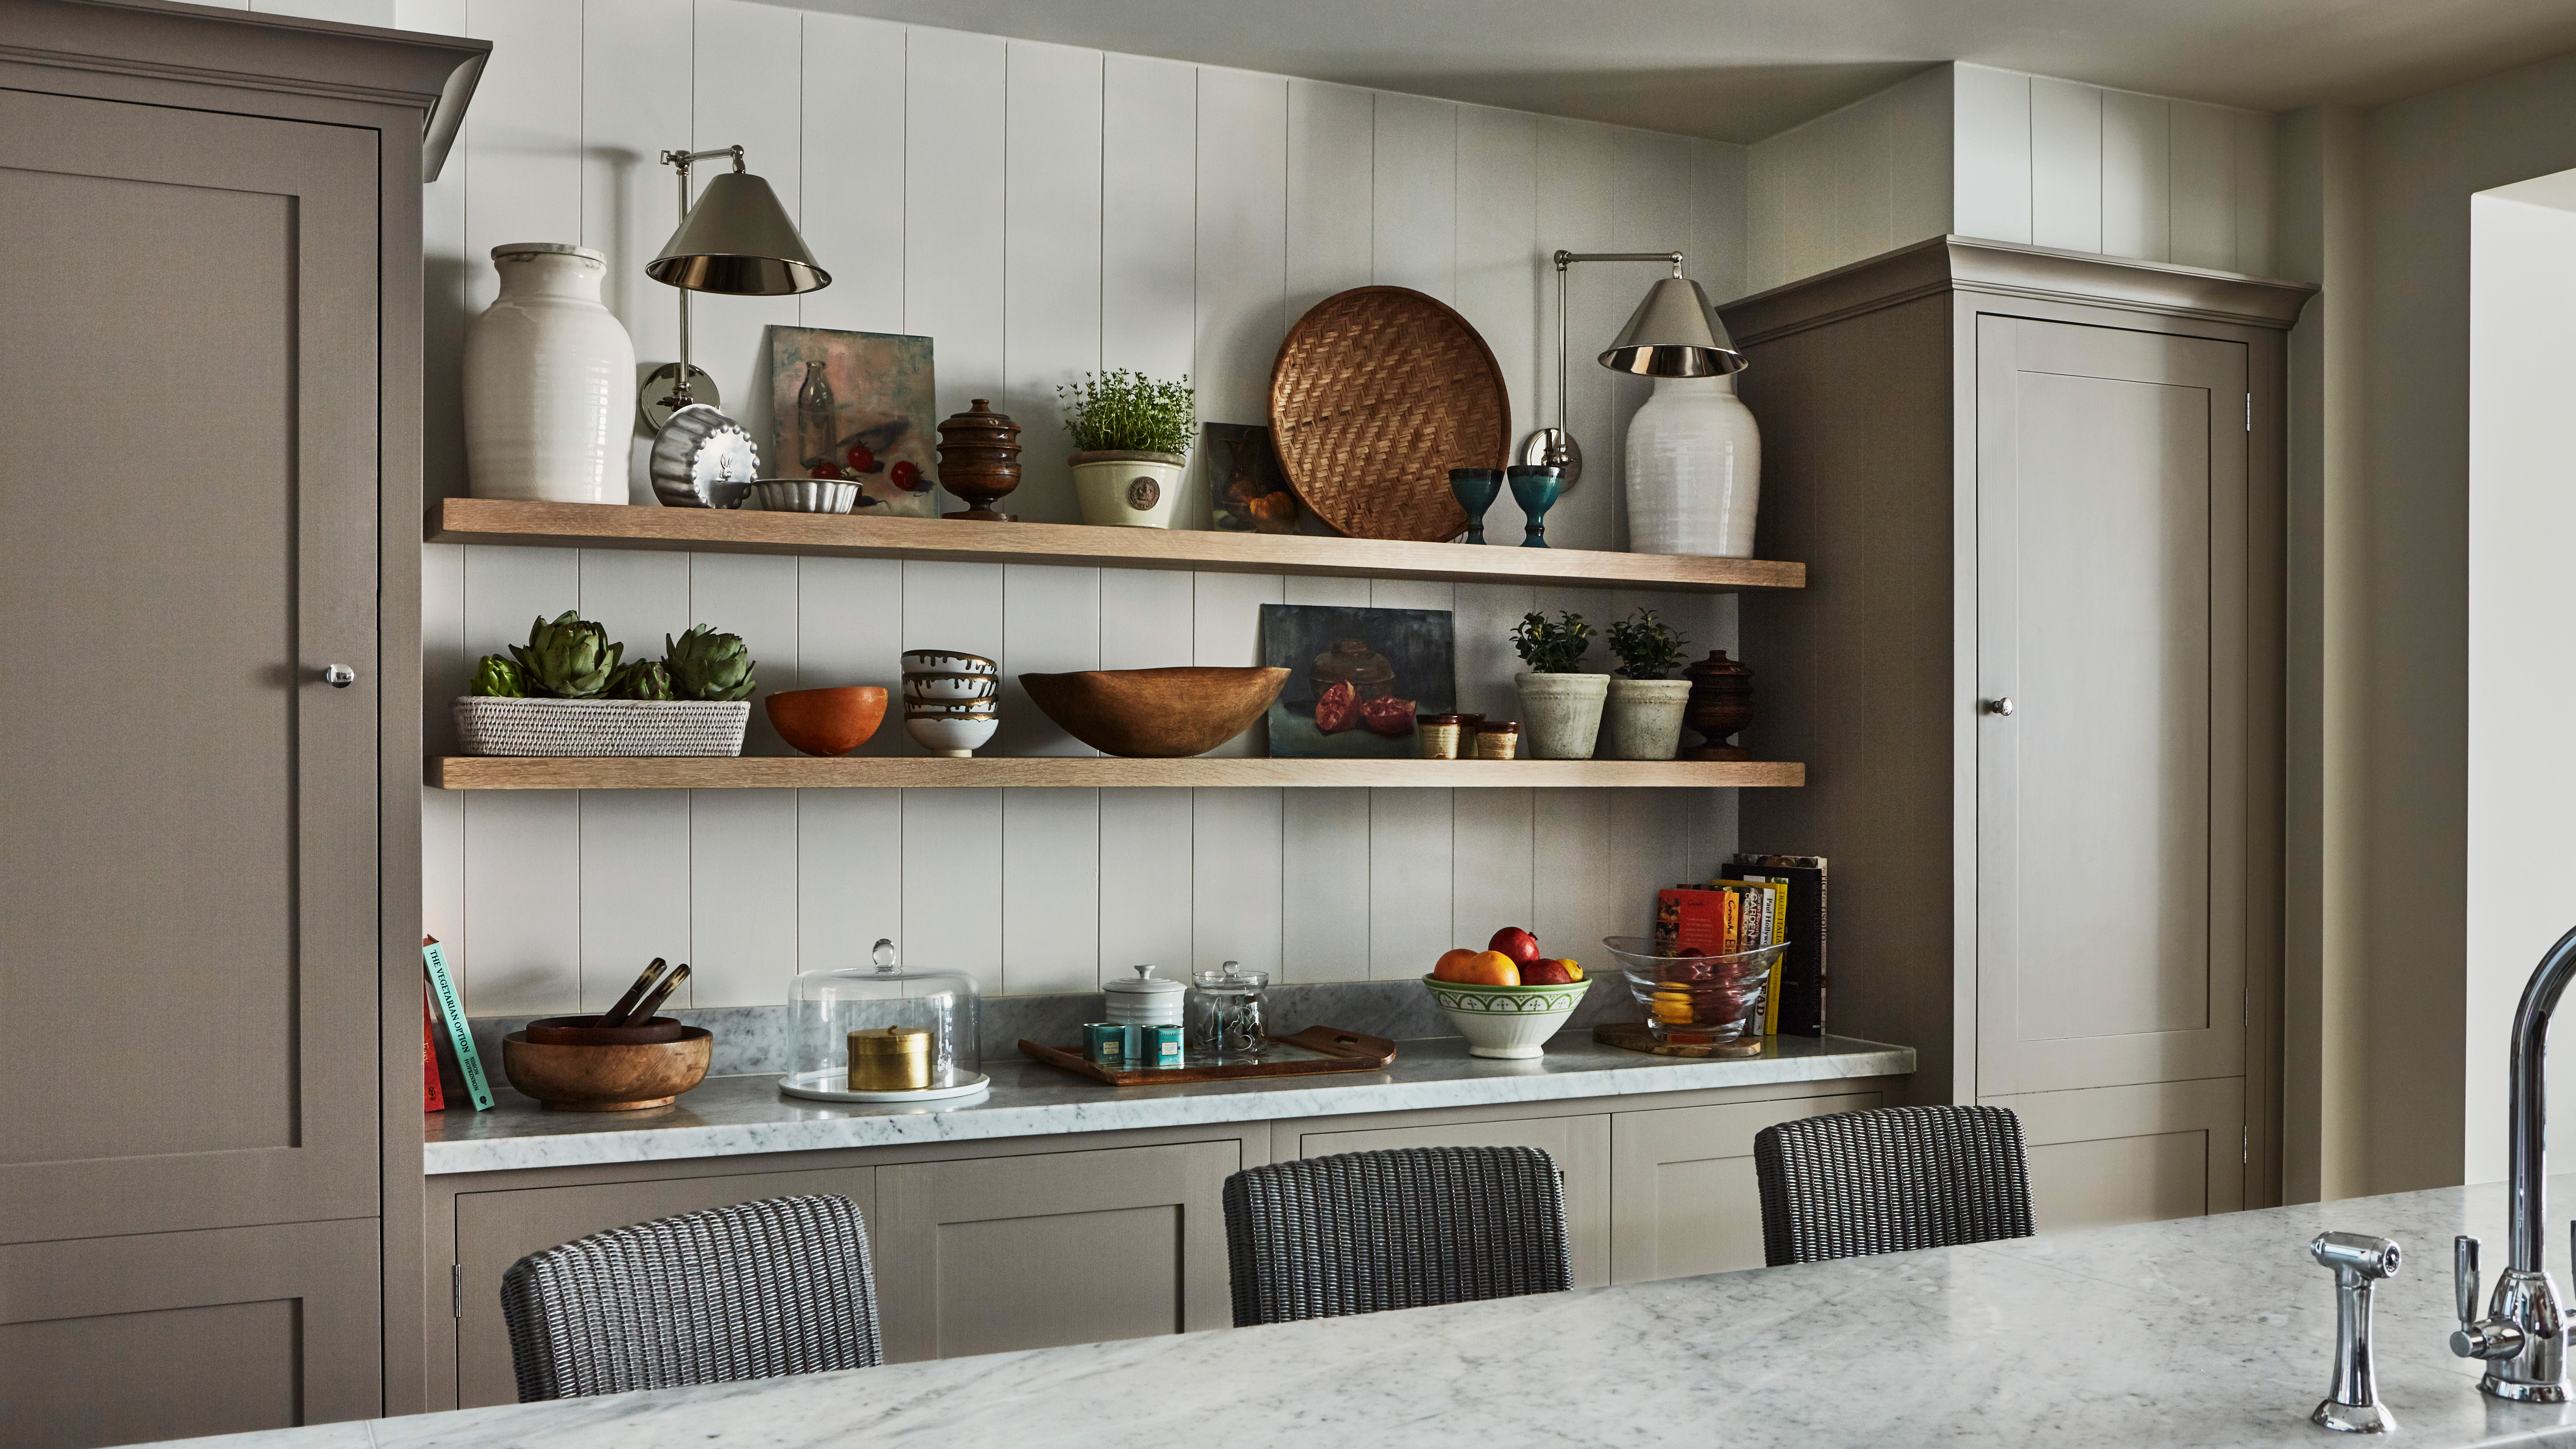 Kitchen Shelving Ideas 14 Ways To, Kitchen Shelving Unit With Doors